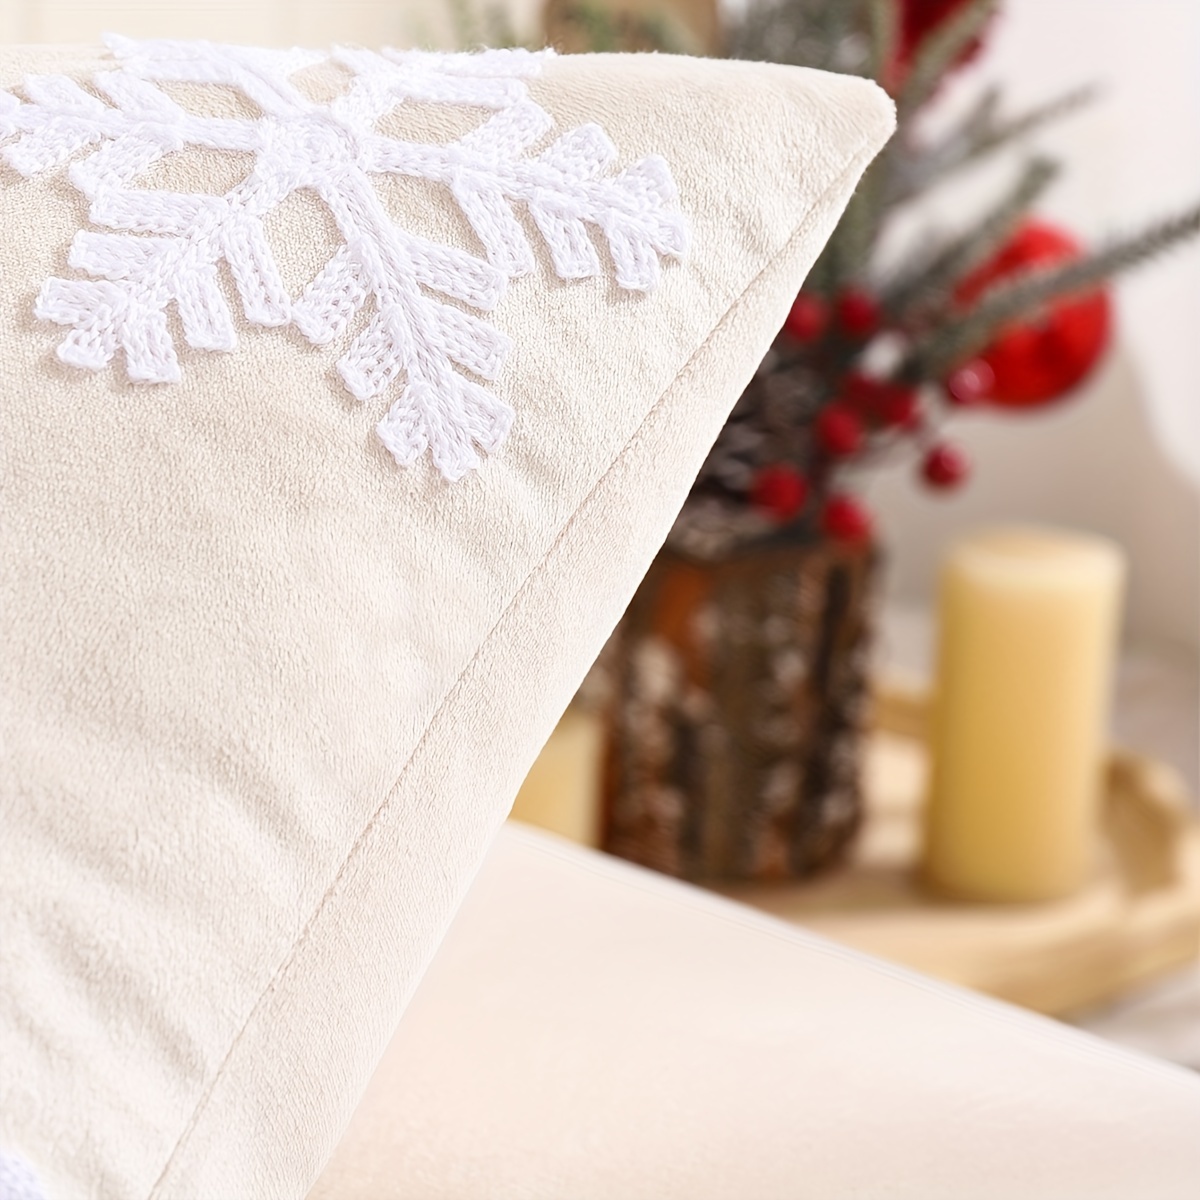 Unknown1 Cozy Embroidery Christmas Throw Pillow Cover Insert White Animal Velvet One Embroidered